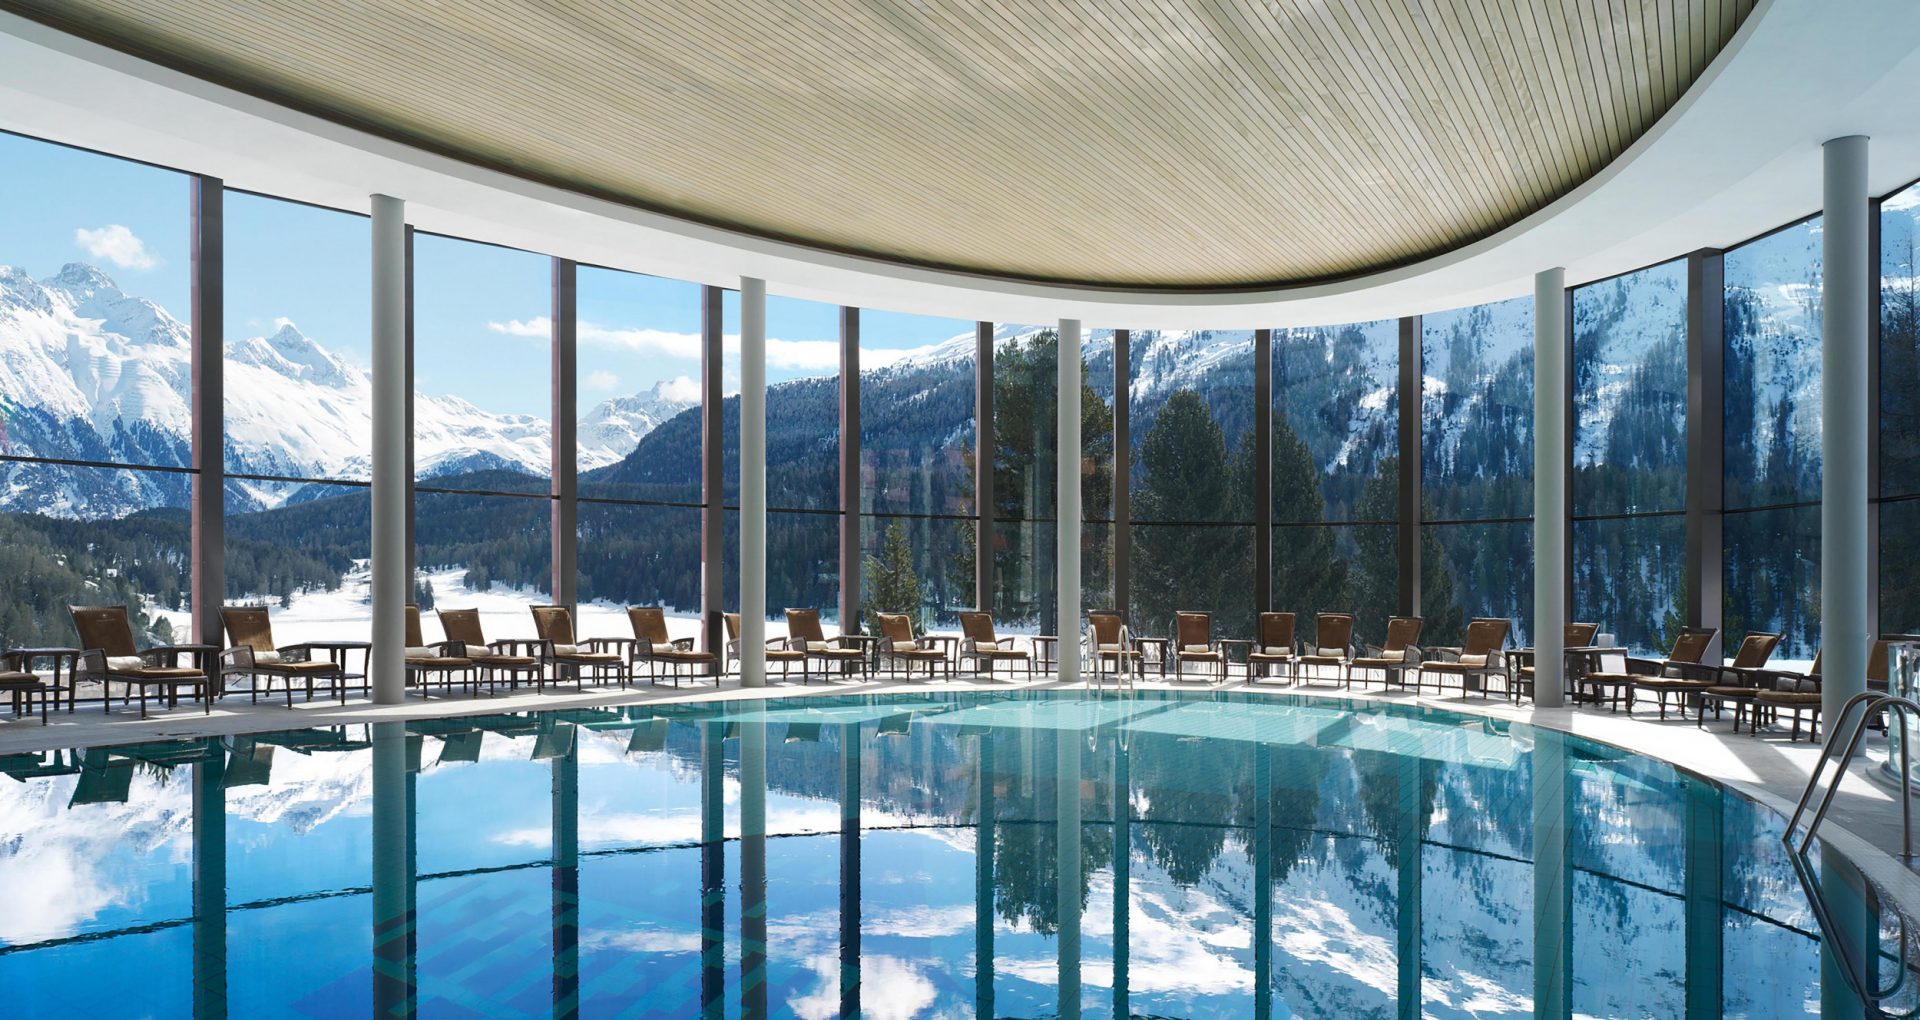 The infinity pool at the exclusive Palace Wellness spa in St. Moritz